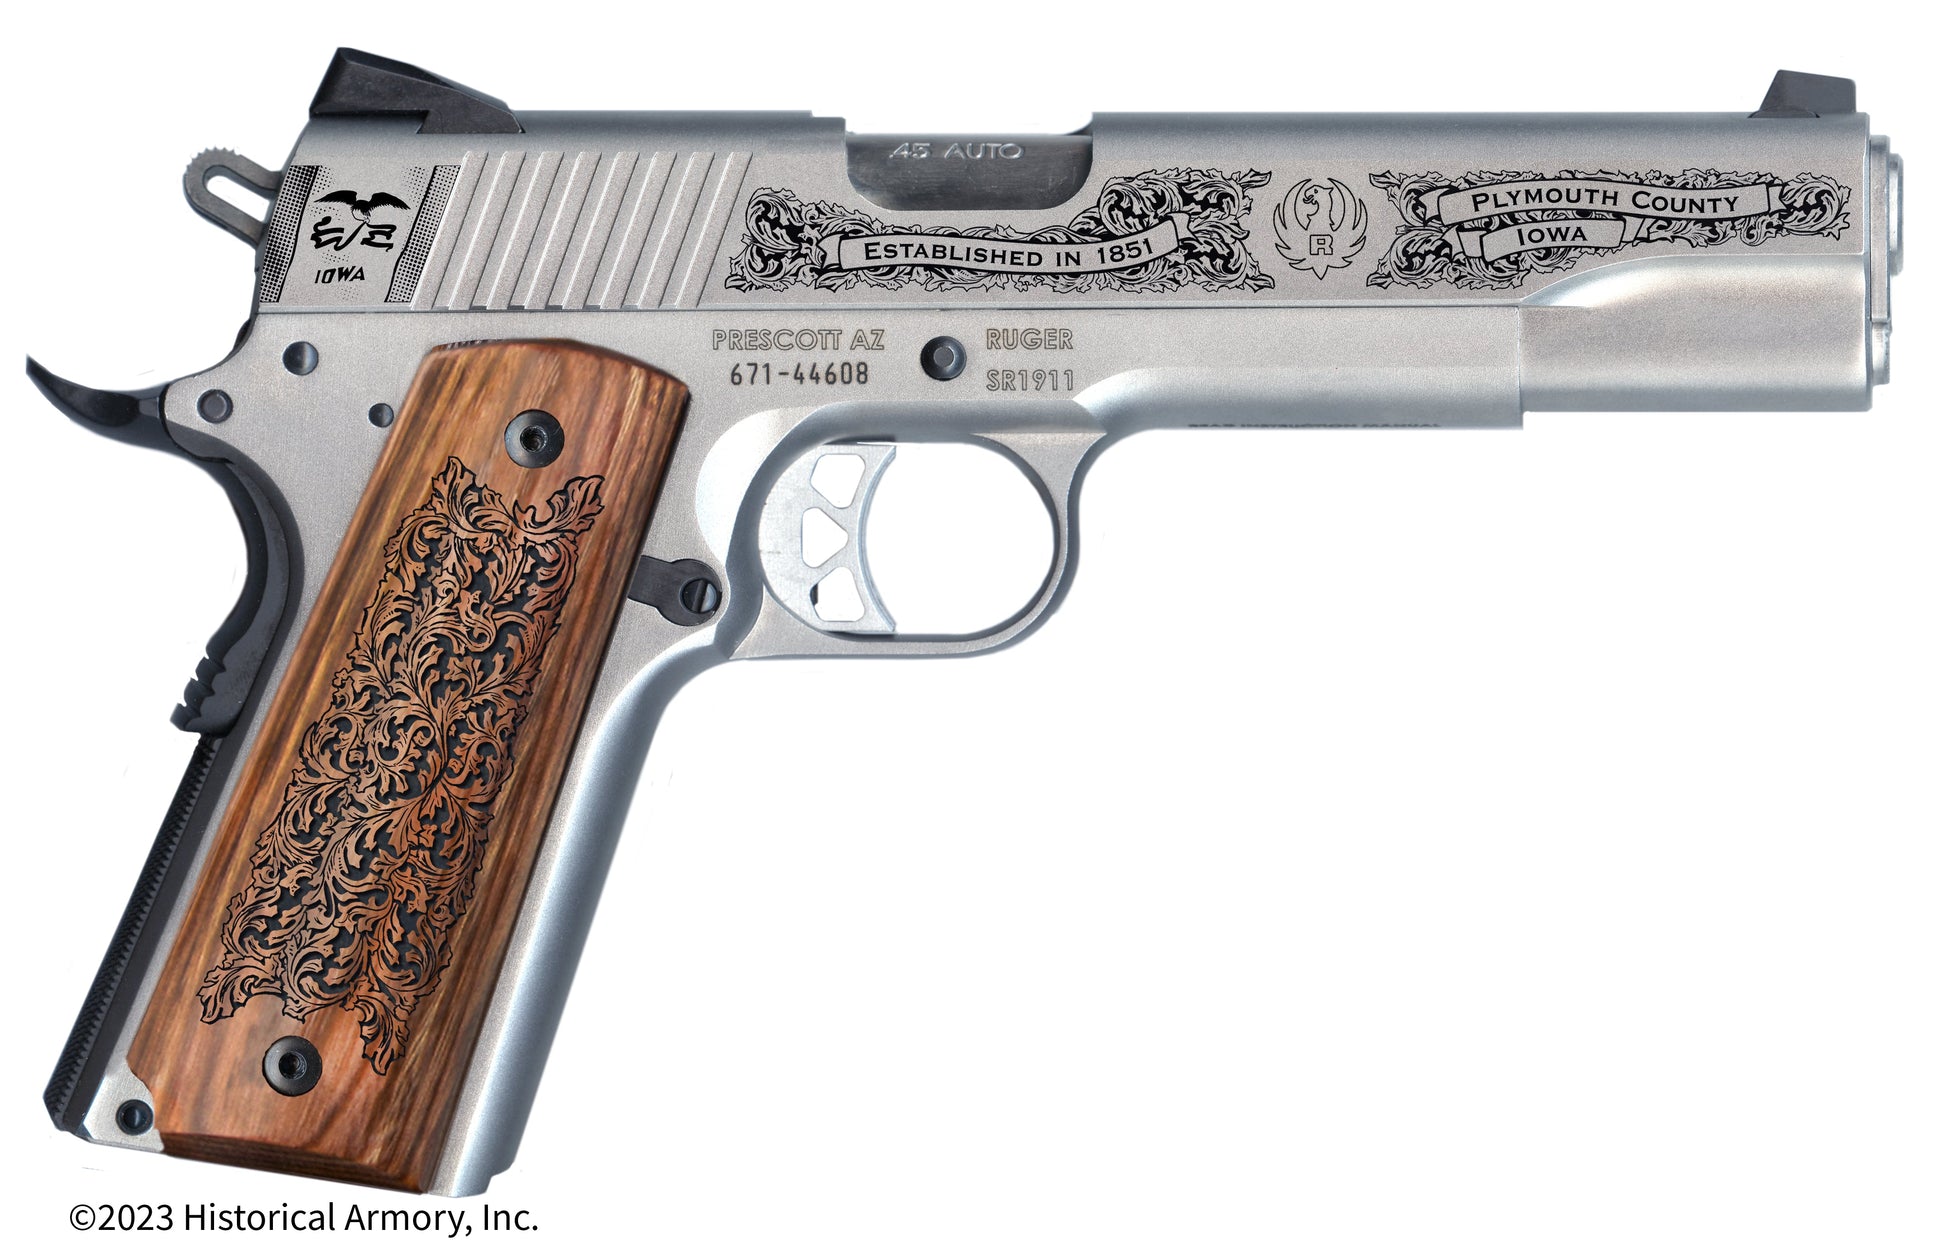 Plymouth County Iowa Engraved .45 Auto Ruger 1911